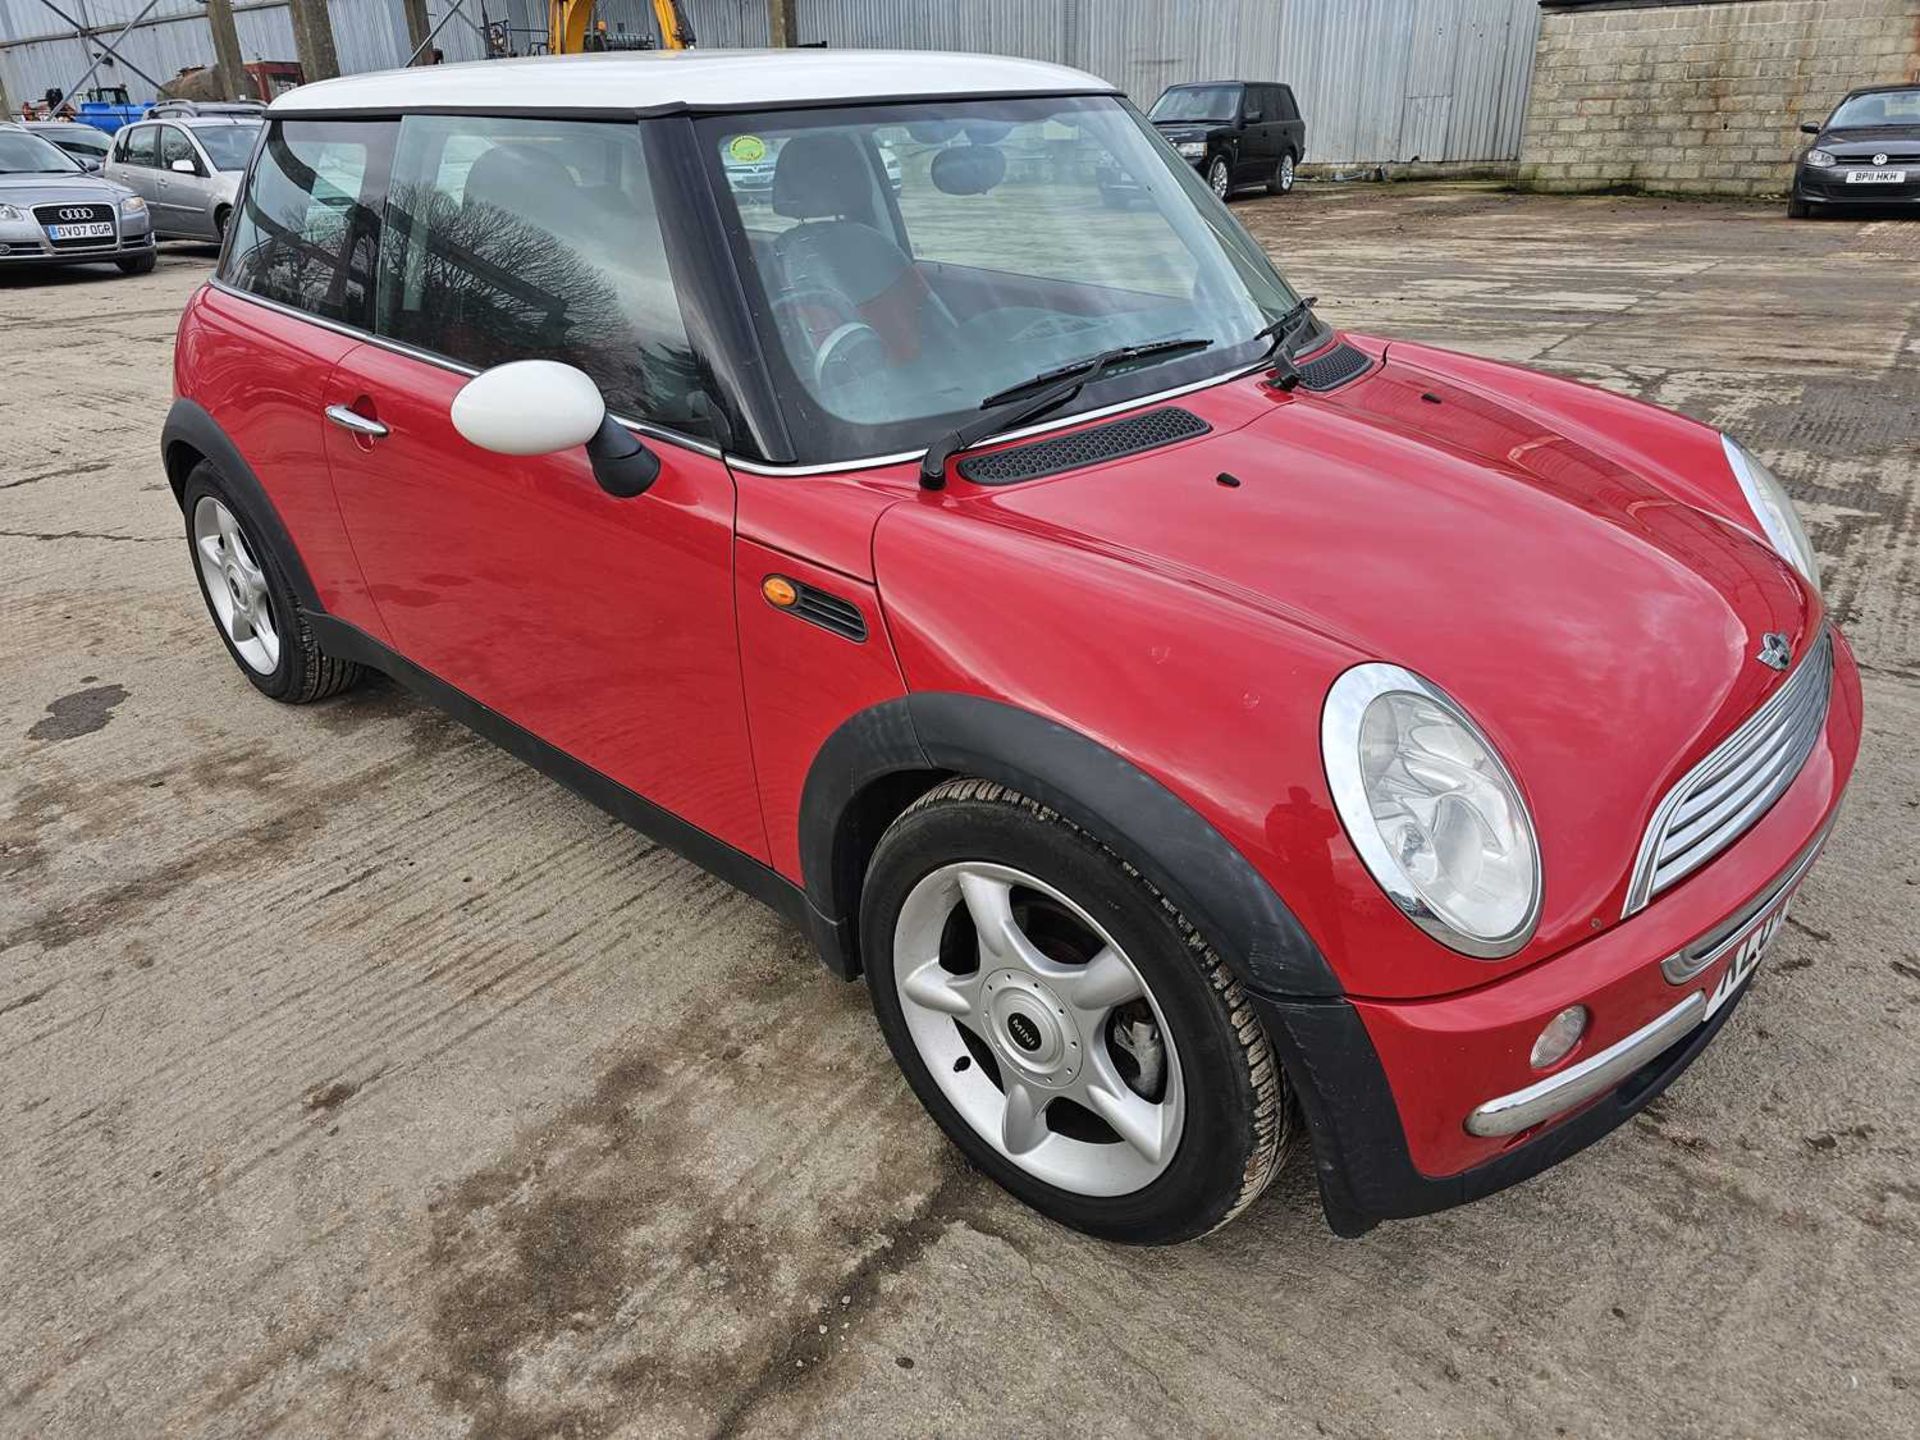 2004 Mini Cooper, 5 Speed, Half Leather, Heated Seats, A/C (Reg. Docs. & Service History Available,  - Image 2 of 29